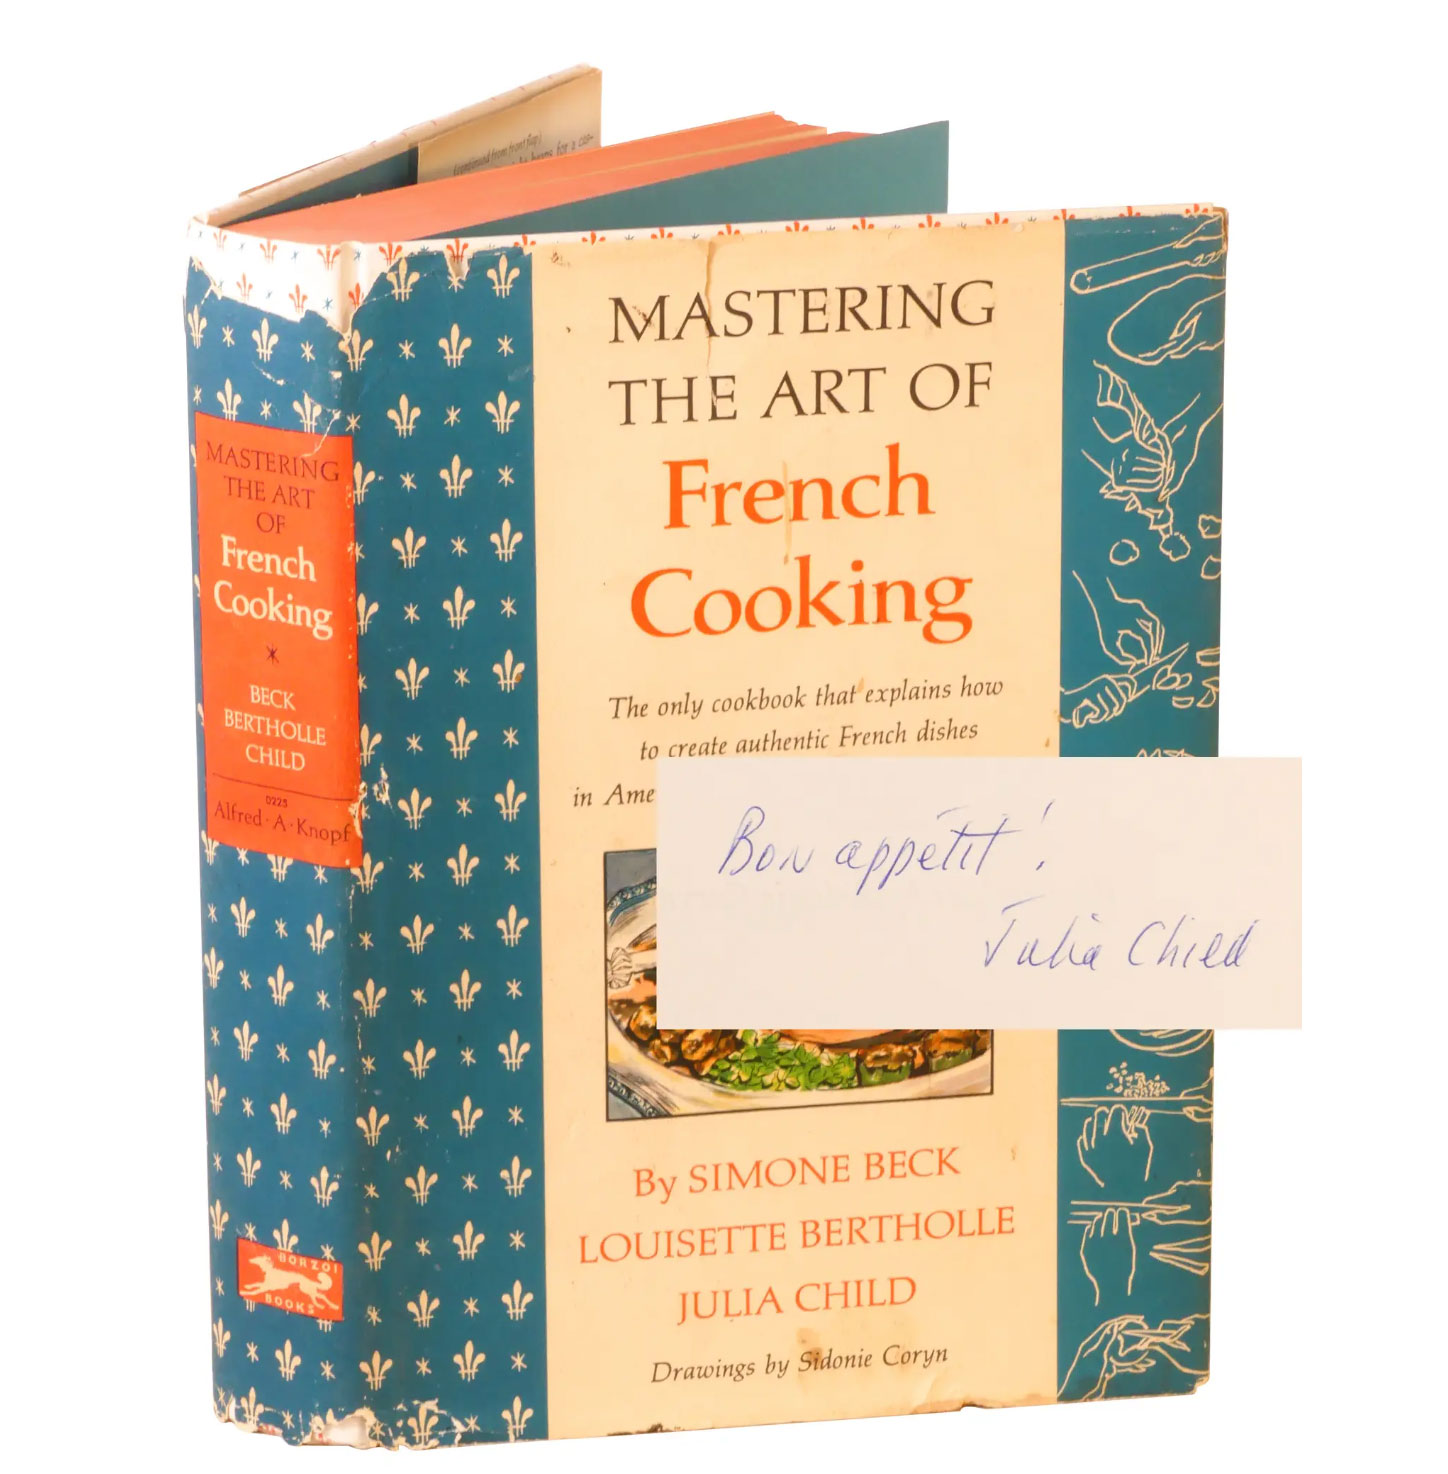 Mastering the Art of French Cooking, Julia Child, et al.